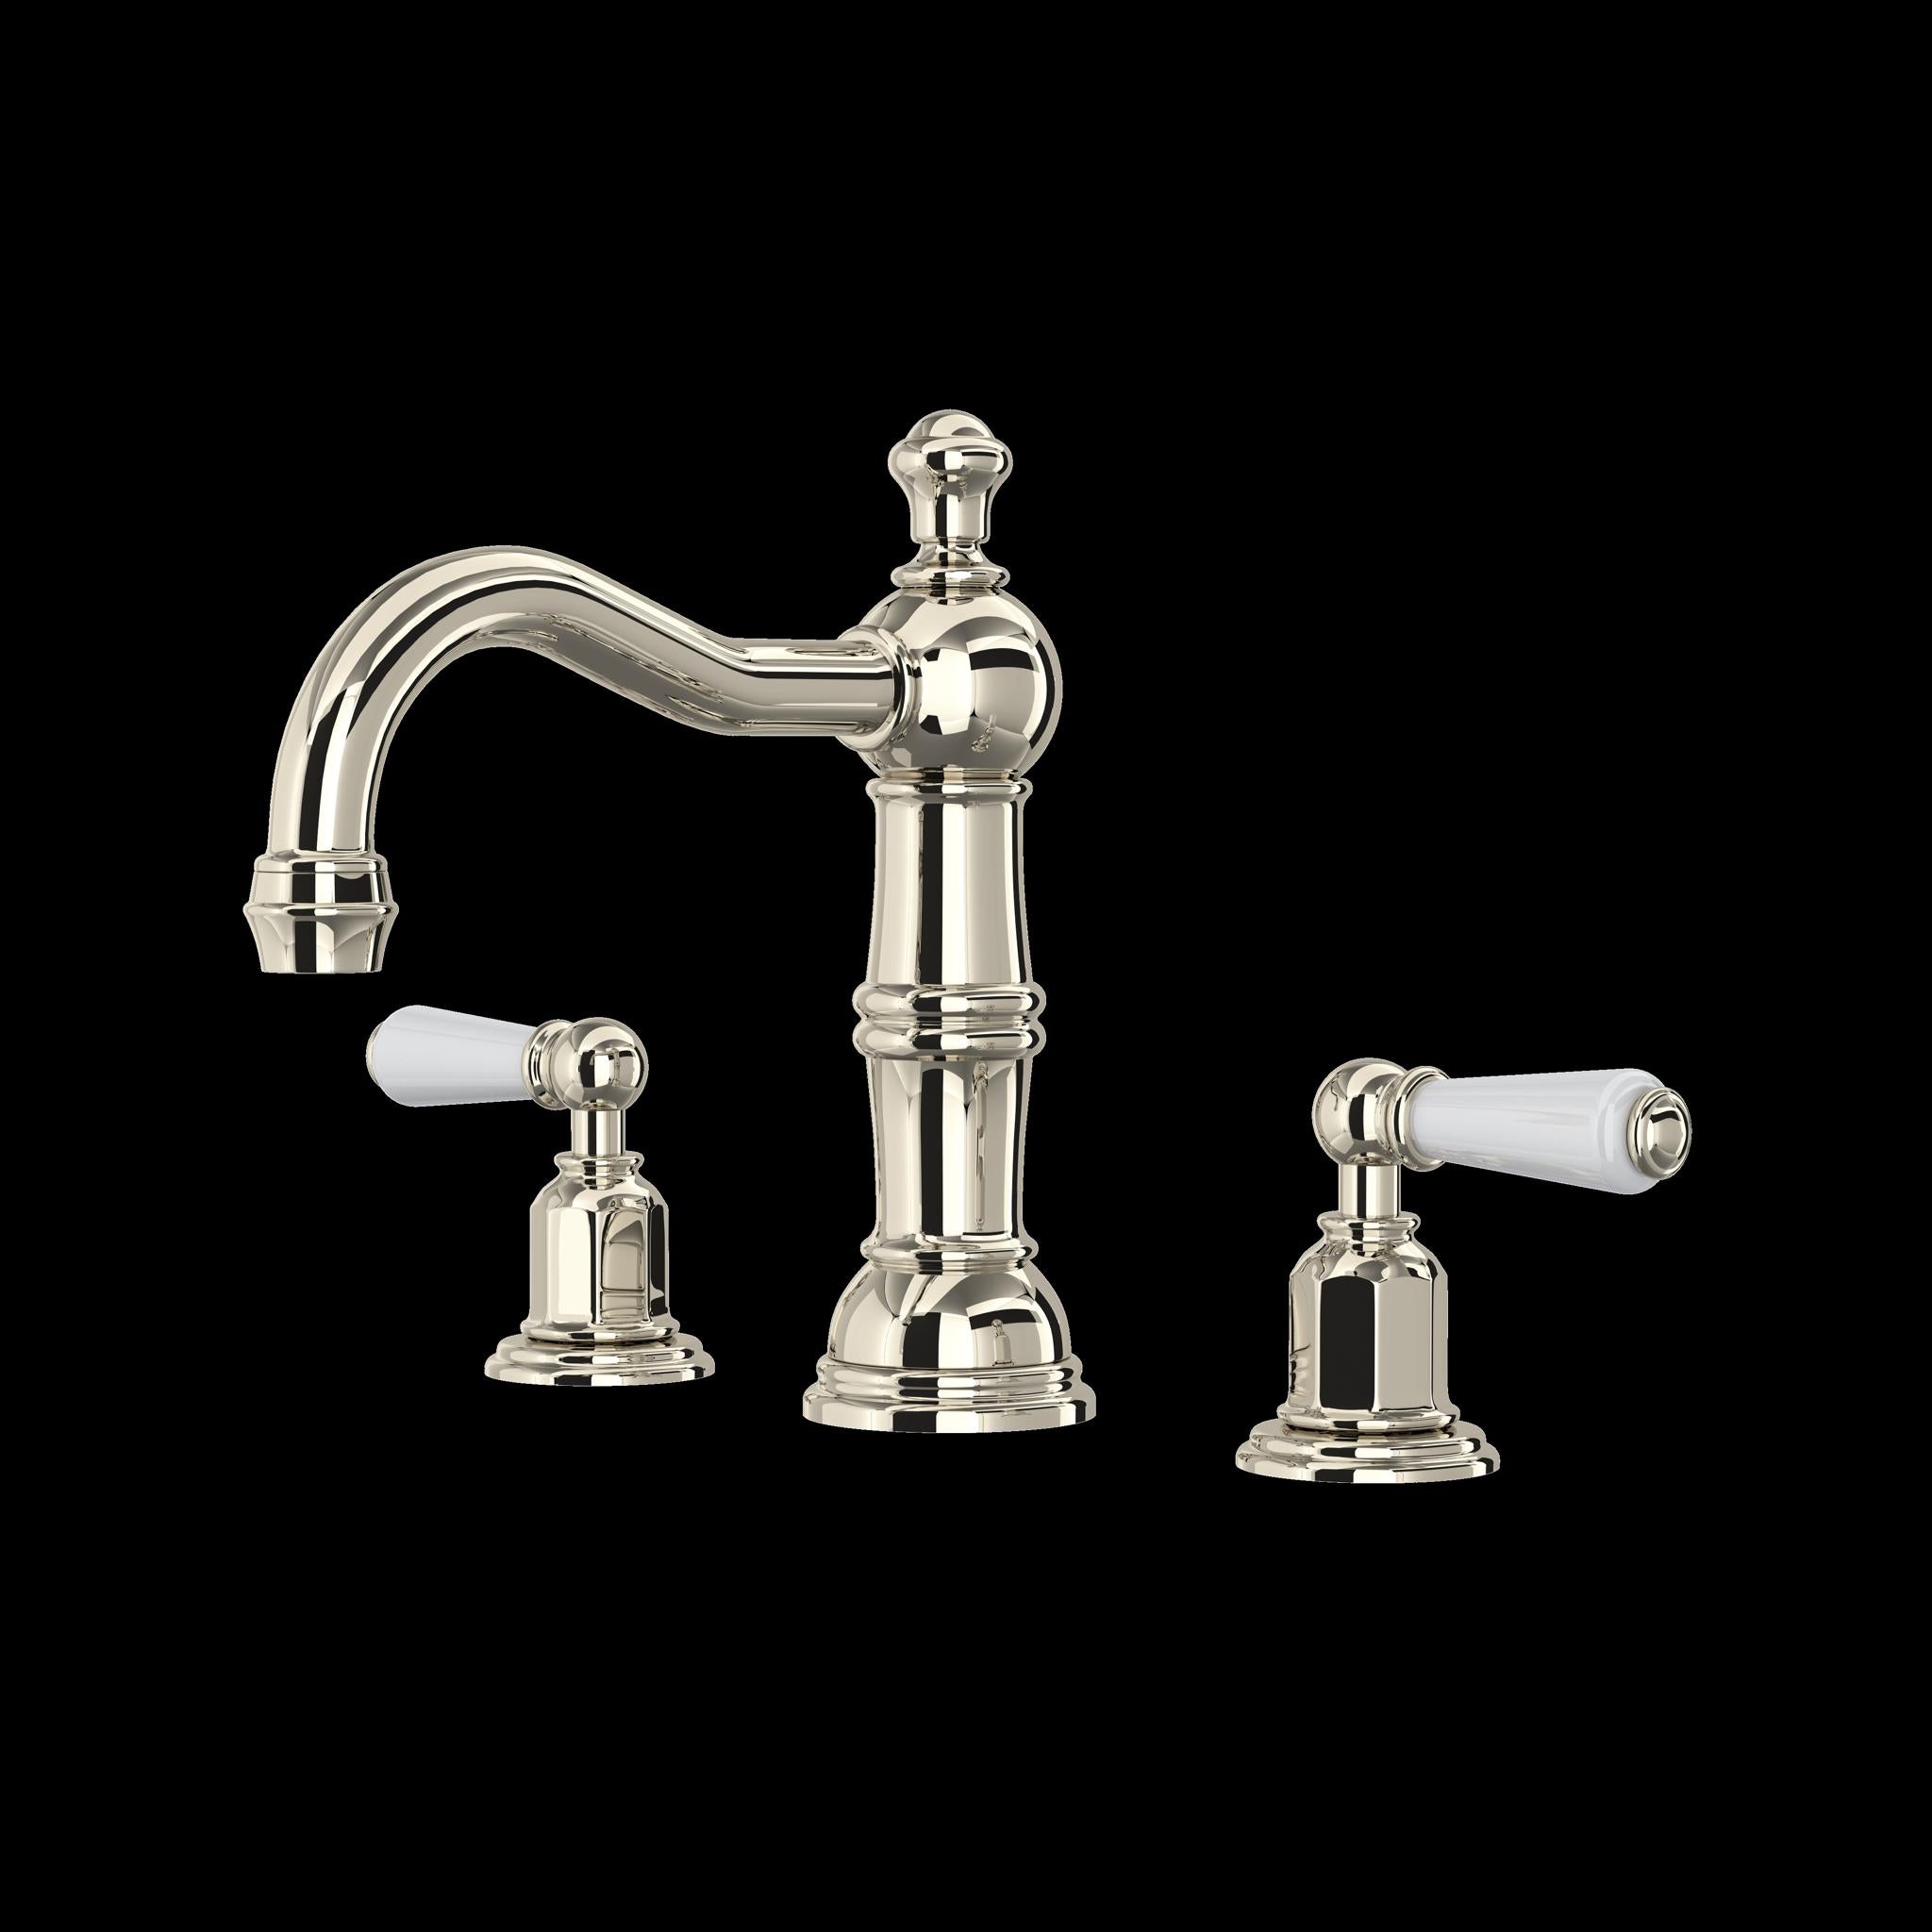 Perrin & Rowe U.3720 Edwardian Widespread Lavatory Faucet With Column Spout